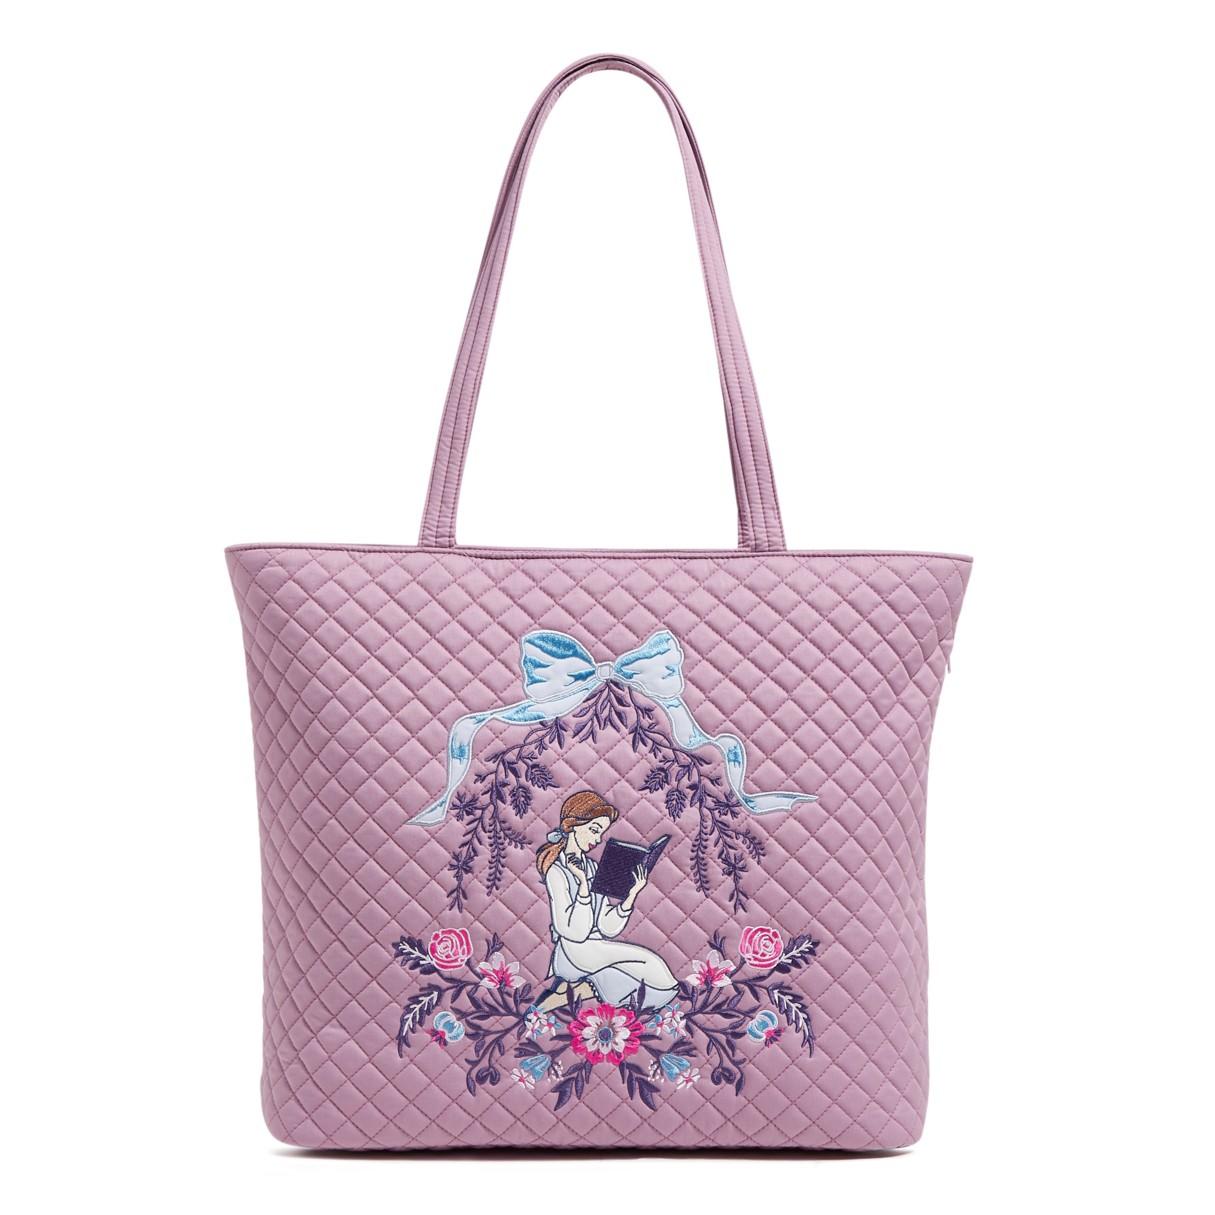 Beauty and the Beast Tote Bag by Vera Bradley